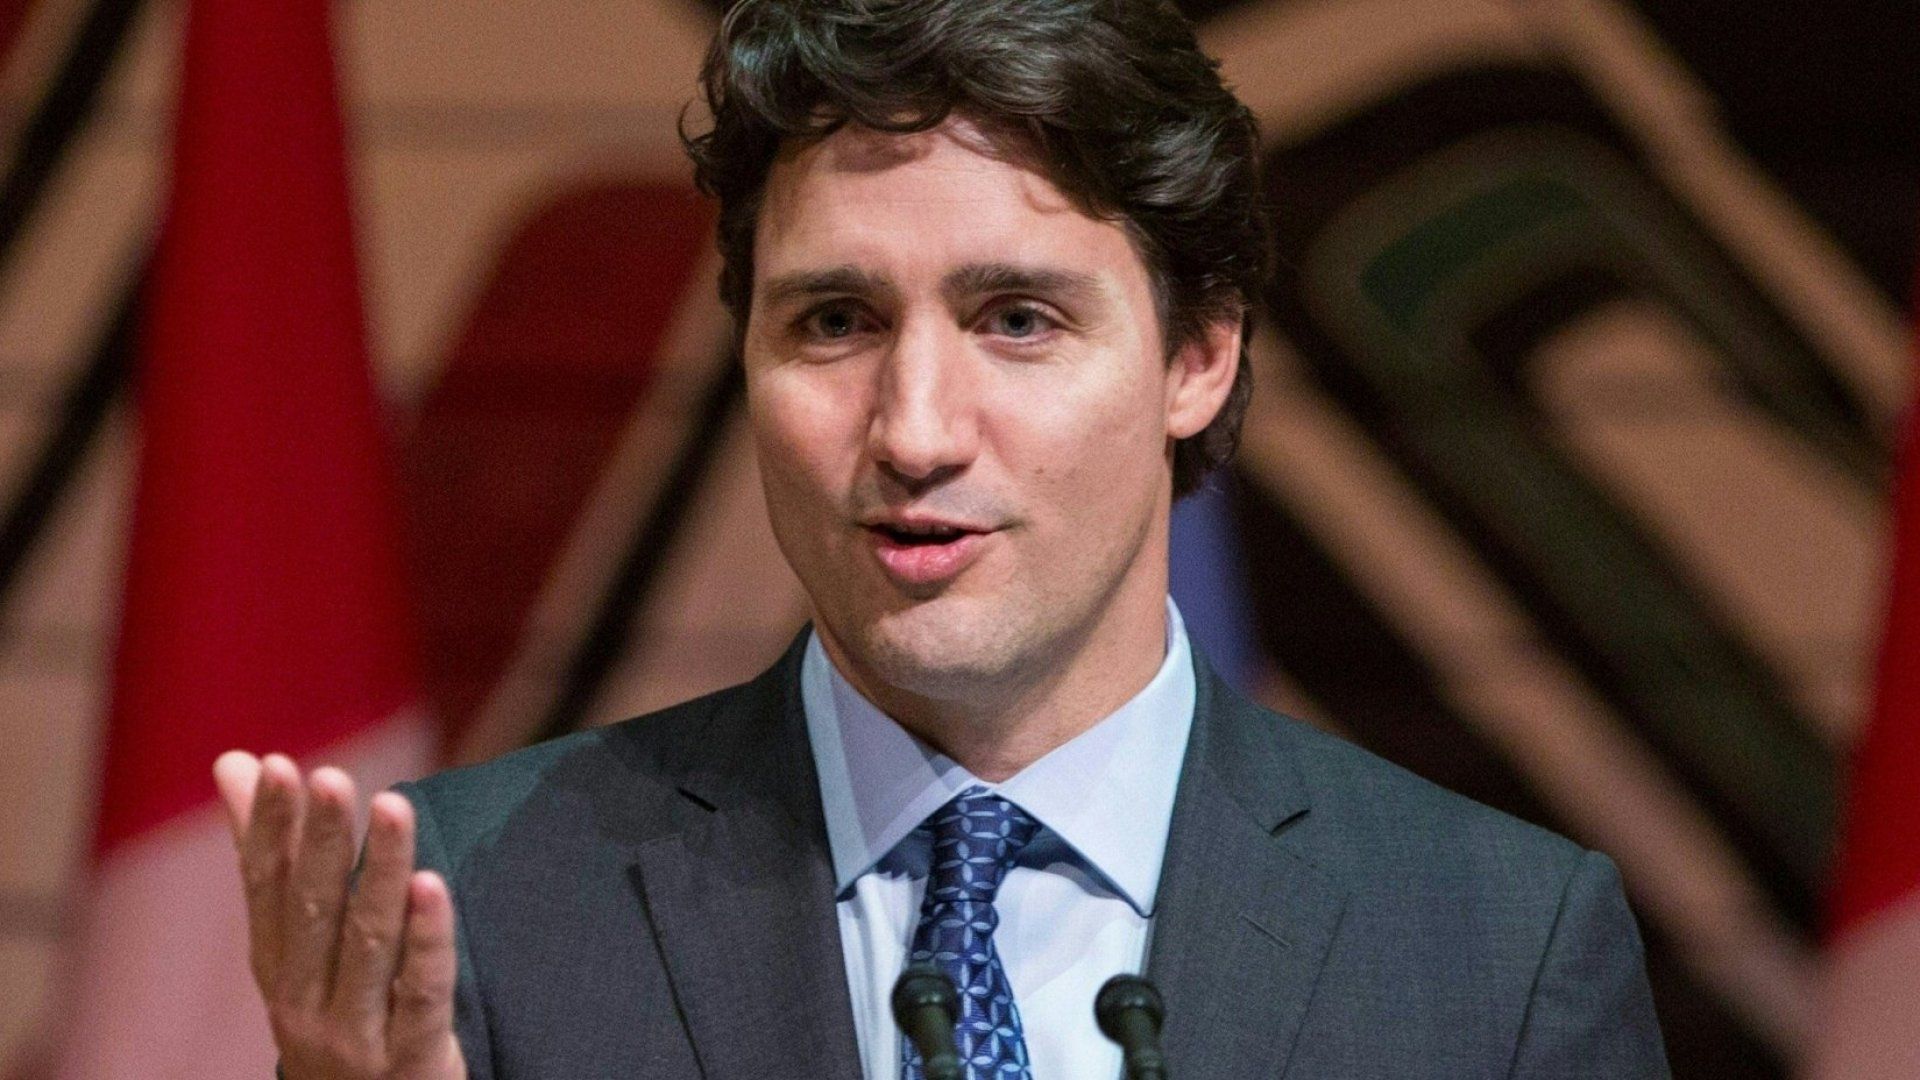 Justin Trudeau's 7 Secrets to Being Extraordinarily Charming